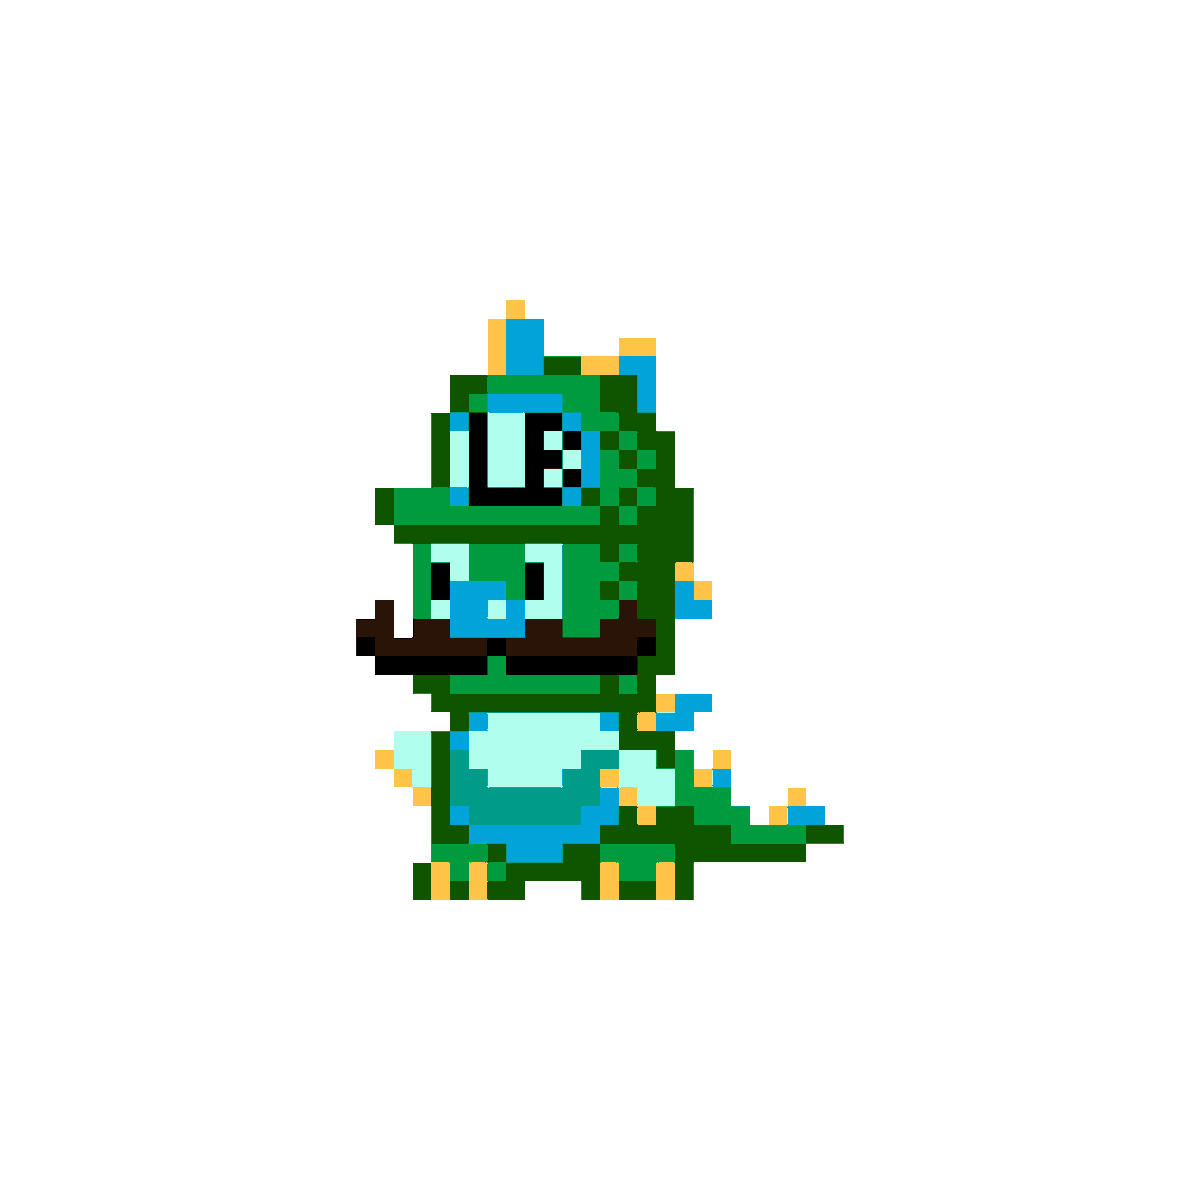 i was shorthing my old pixel arts and i find this:
#SuperMarioBros #bubbleboble #pixelart